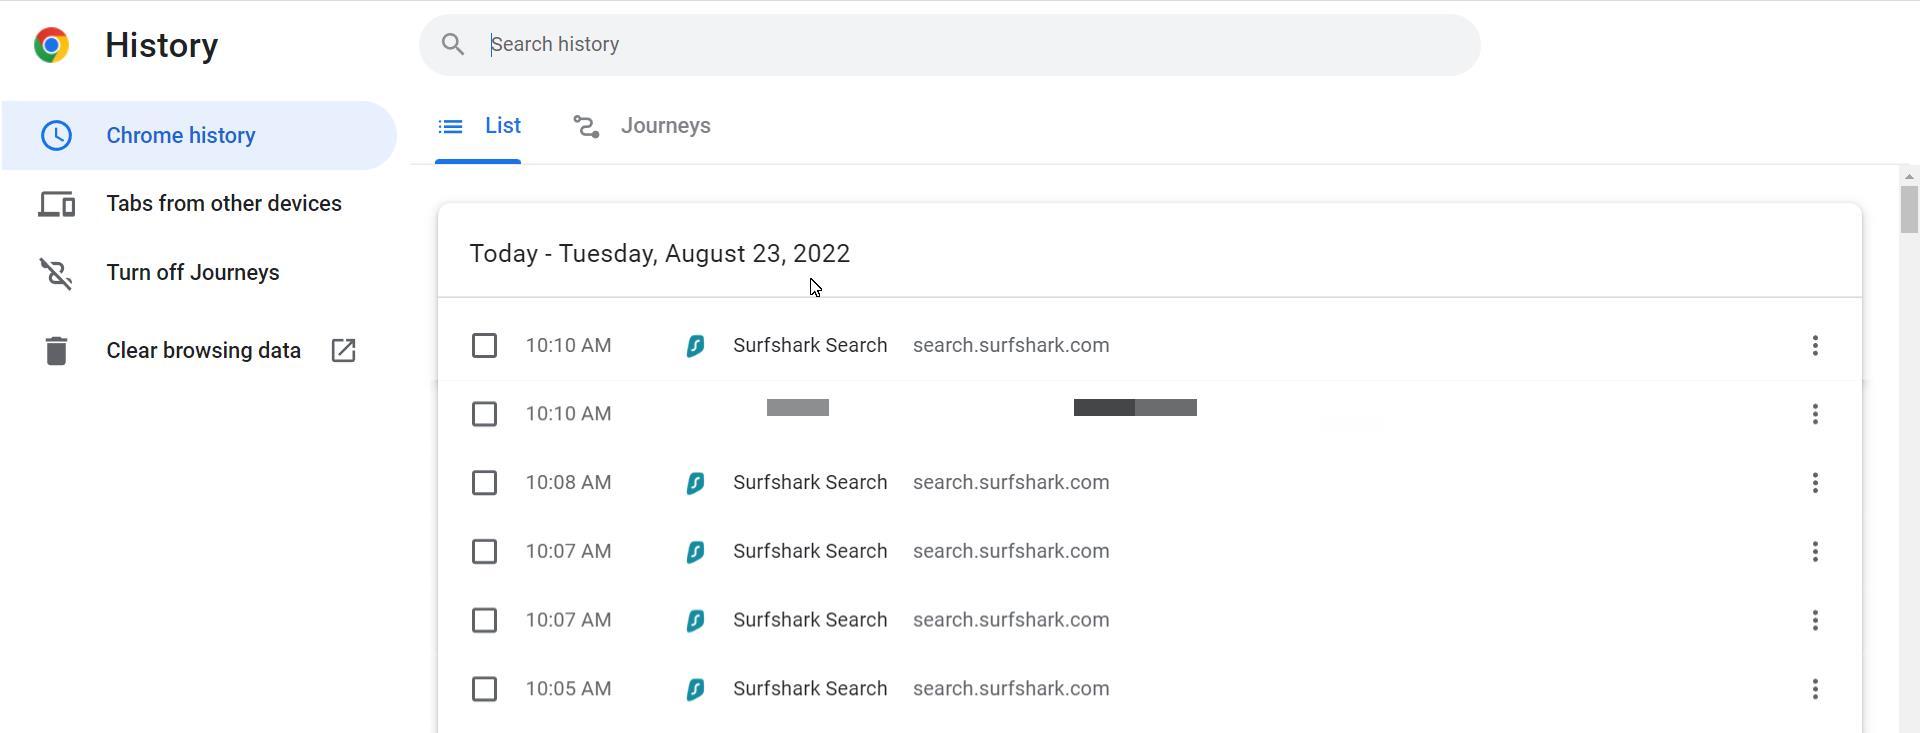 Our Surfshark searches showed up in our Google Chrome history, so Surfshark Search may not provide the full amount of privacy it promises.